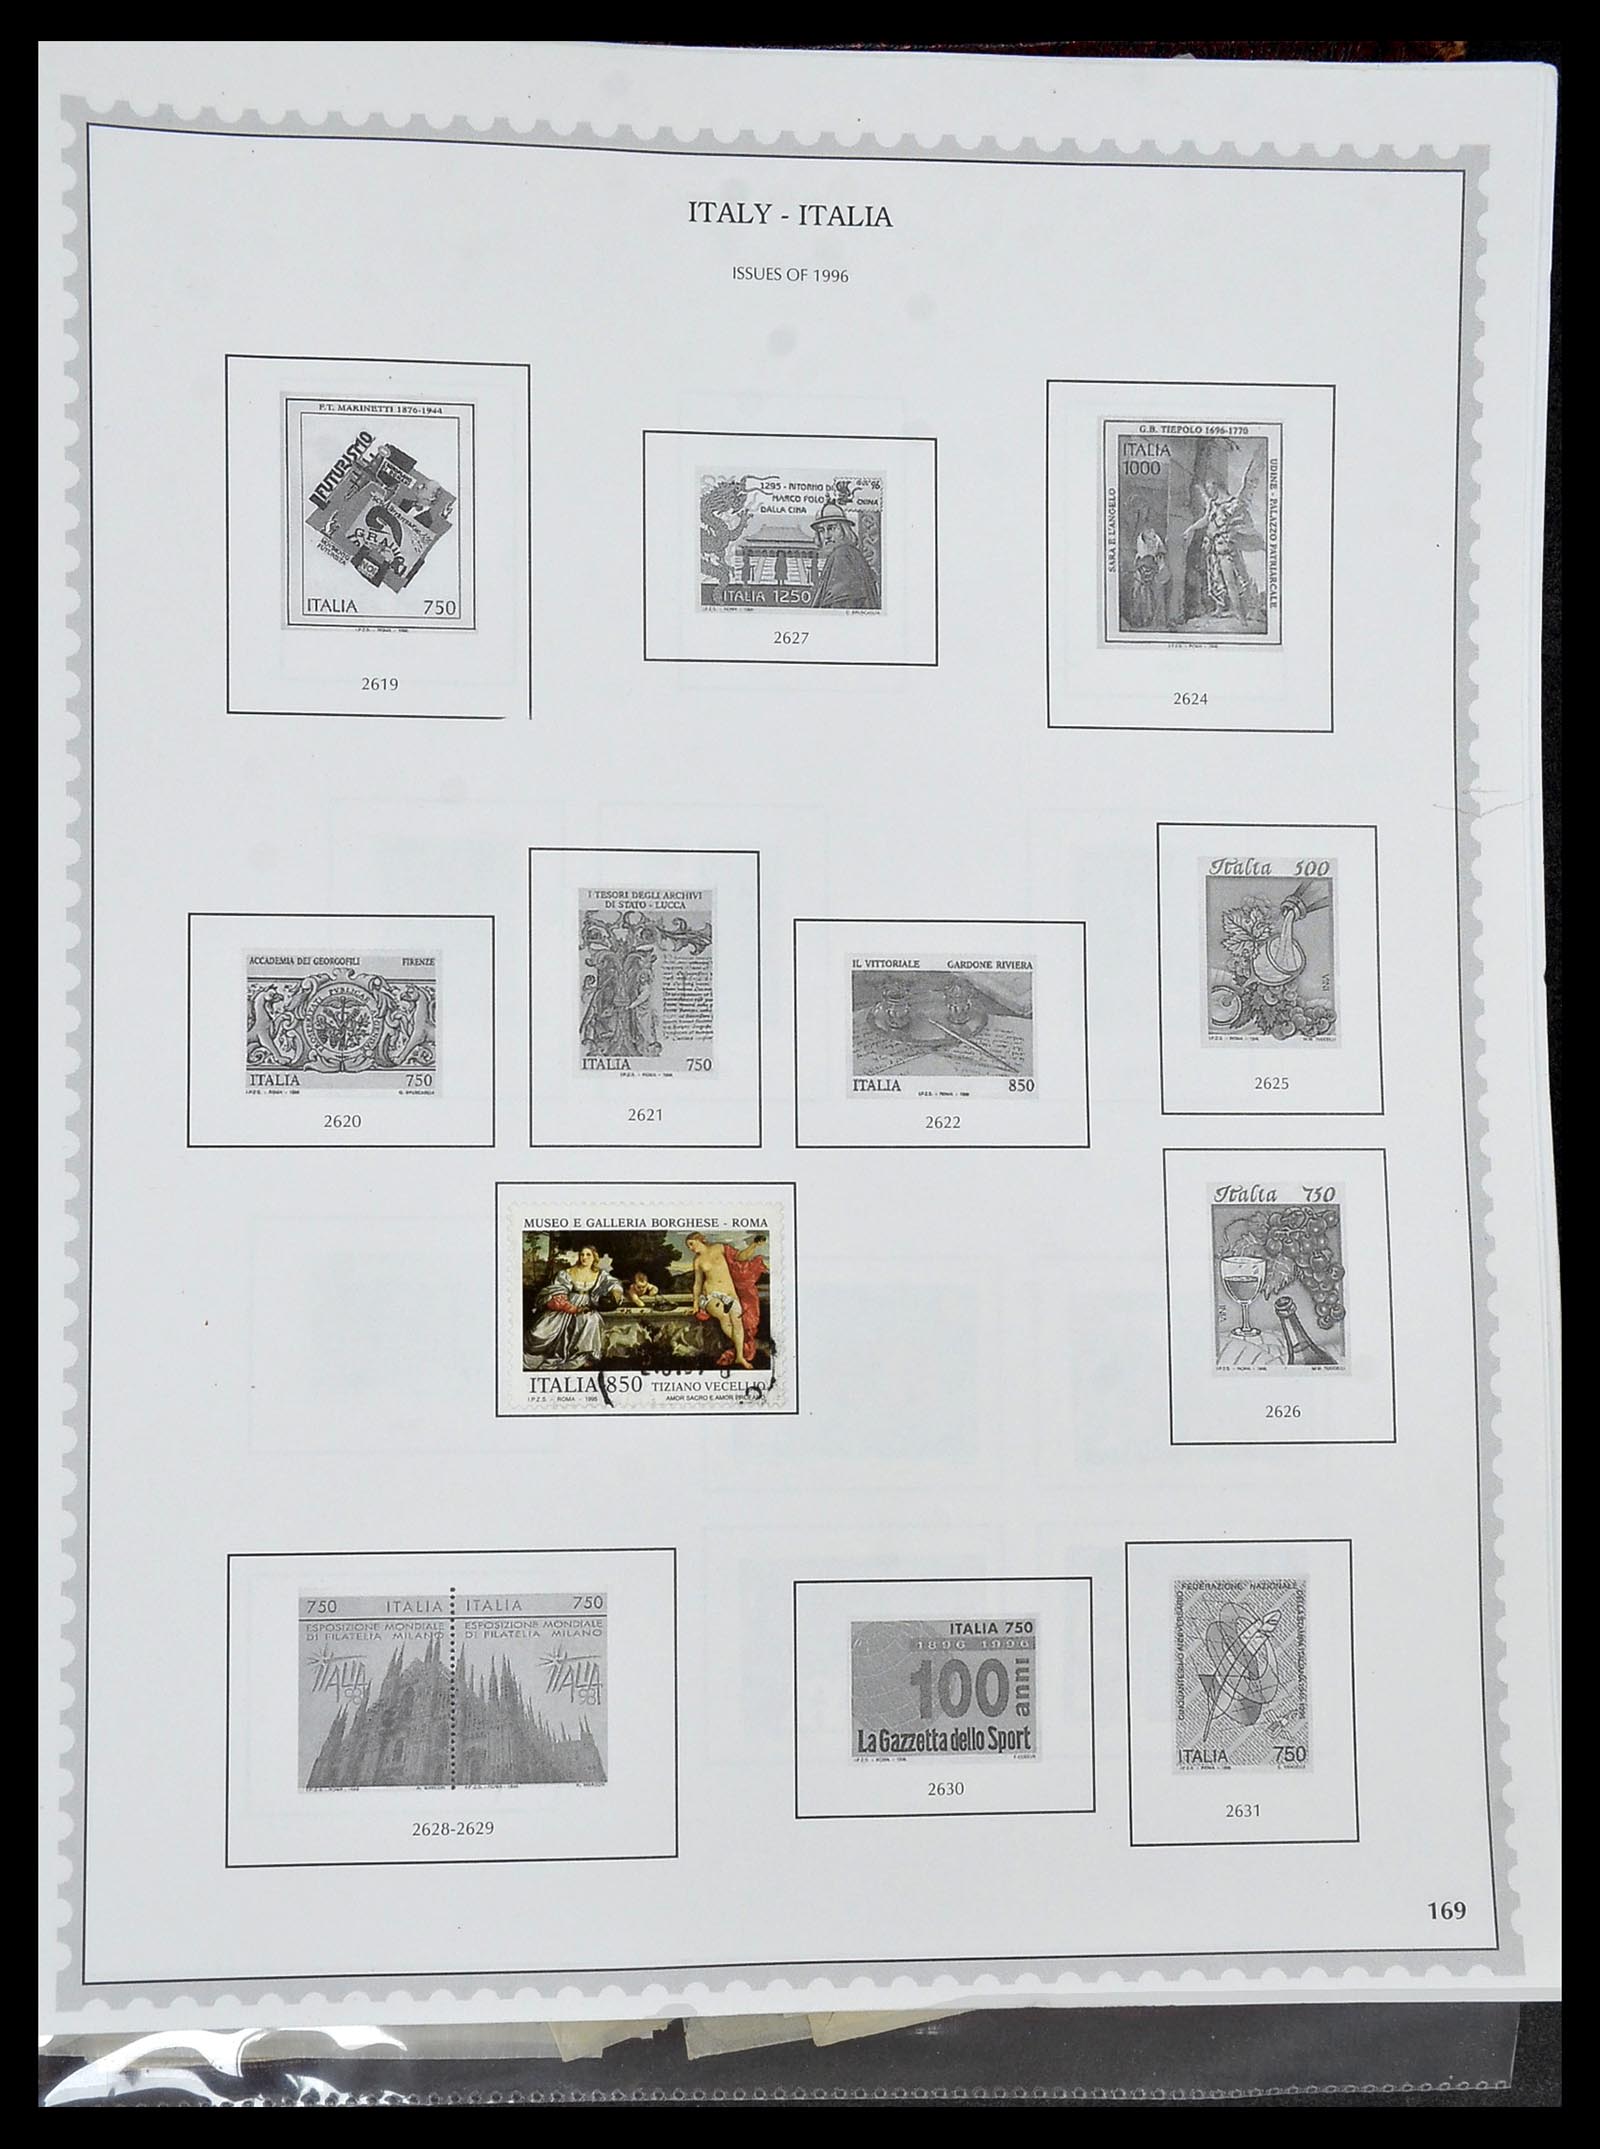 34401 169 - Stamp collection 34401 Italy and territories 1850-1990.